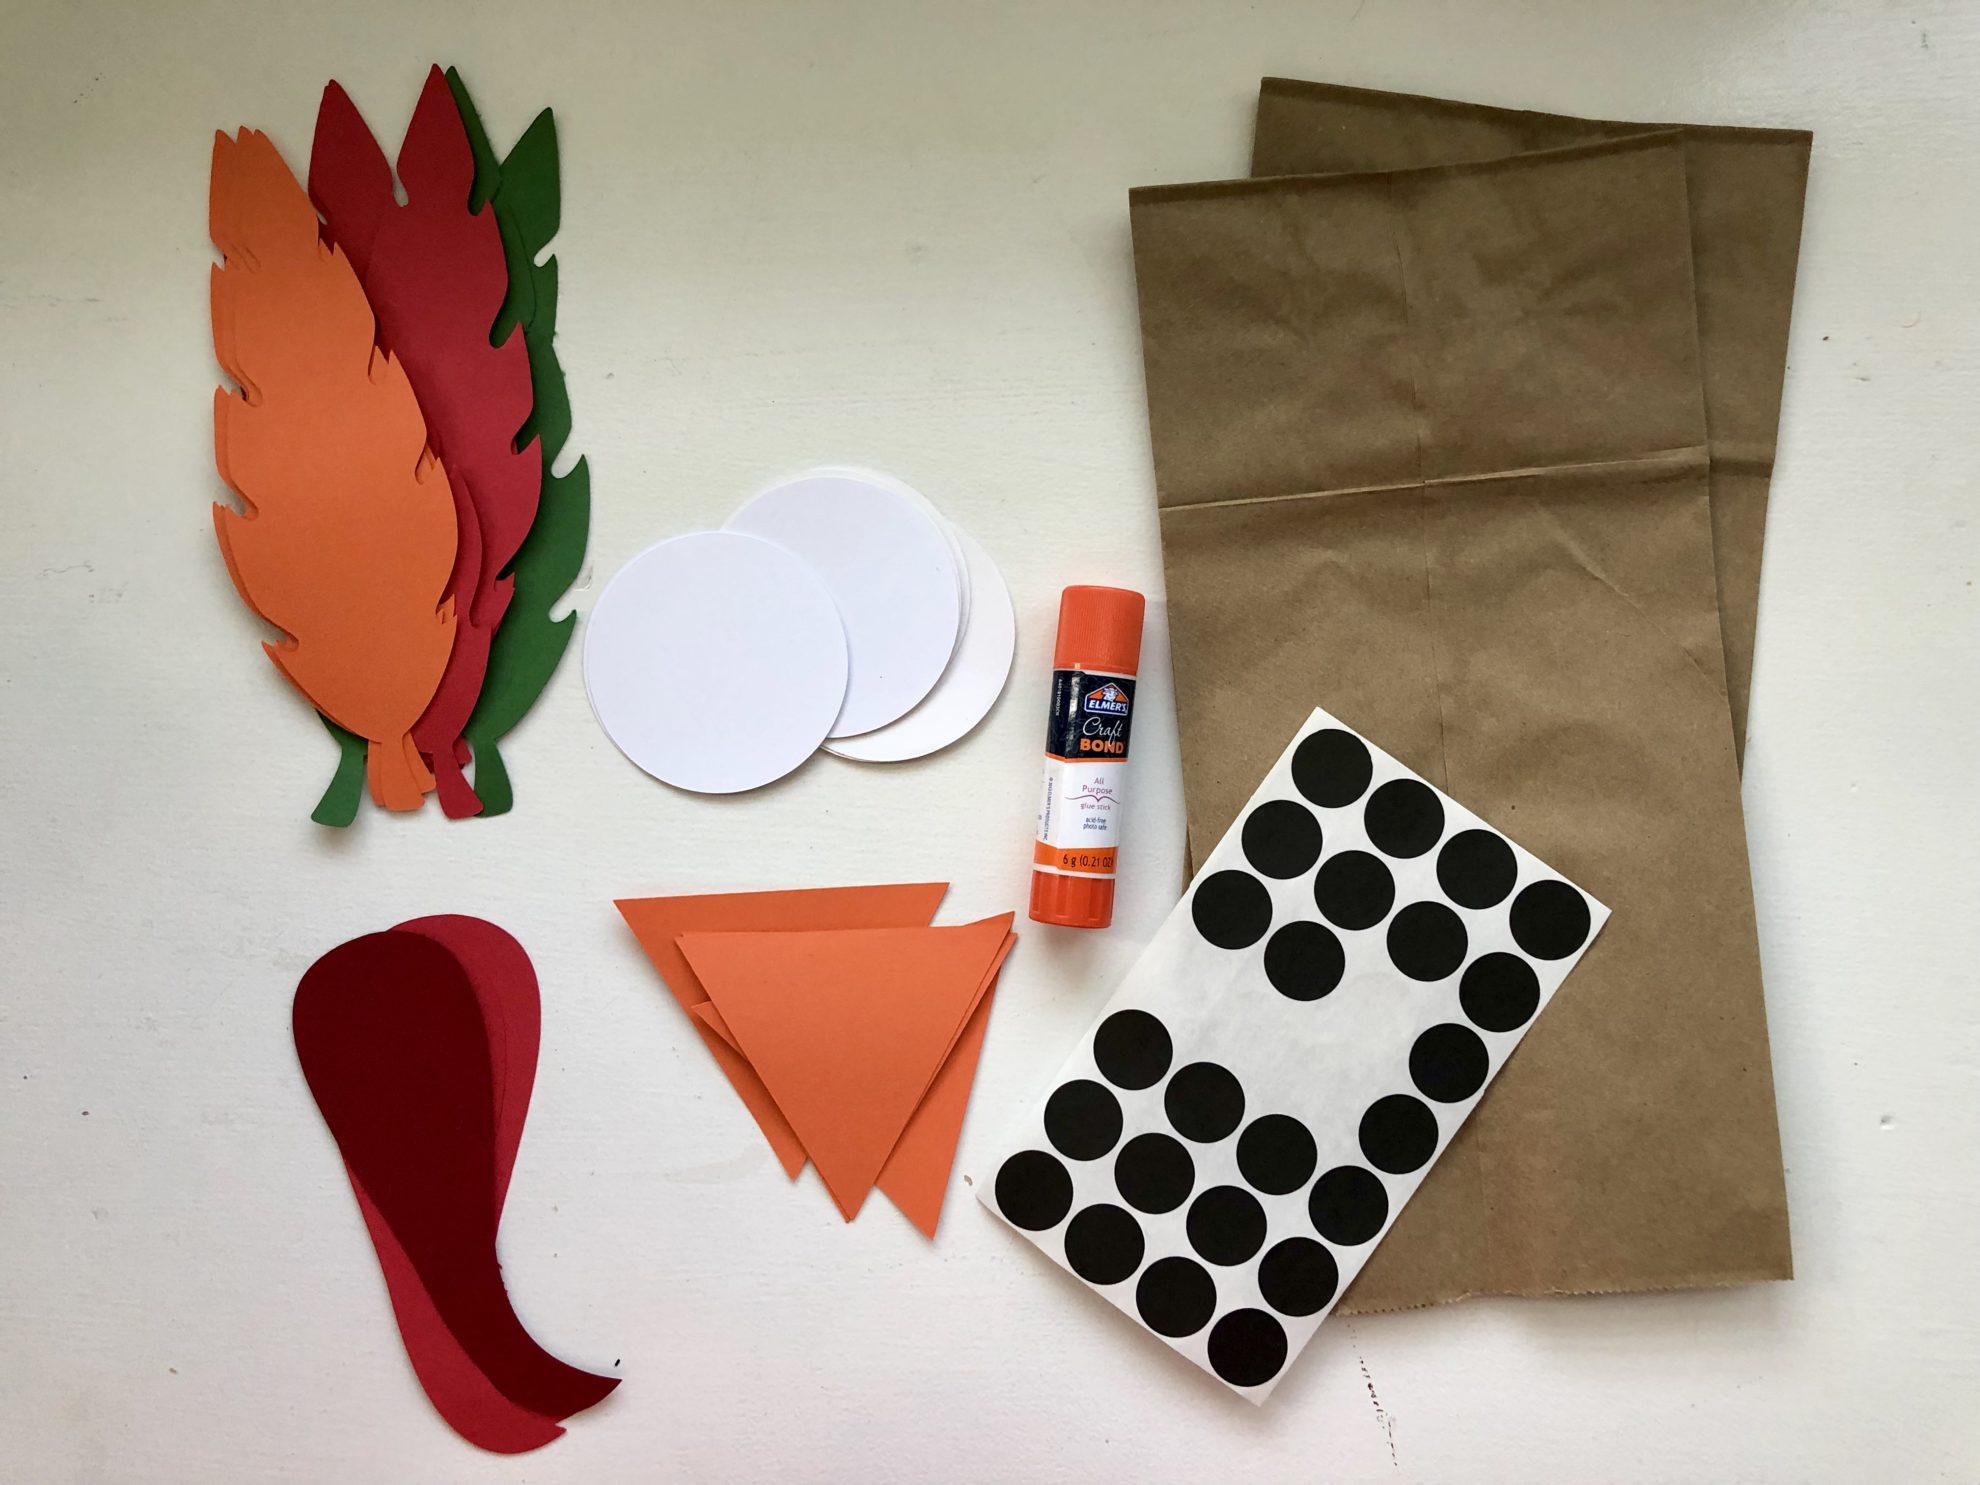 Supplies: paper feathers, white circles, orange triangles, red gobblets, glue stick, black sticker dots, and paper bags.